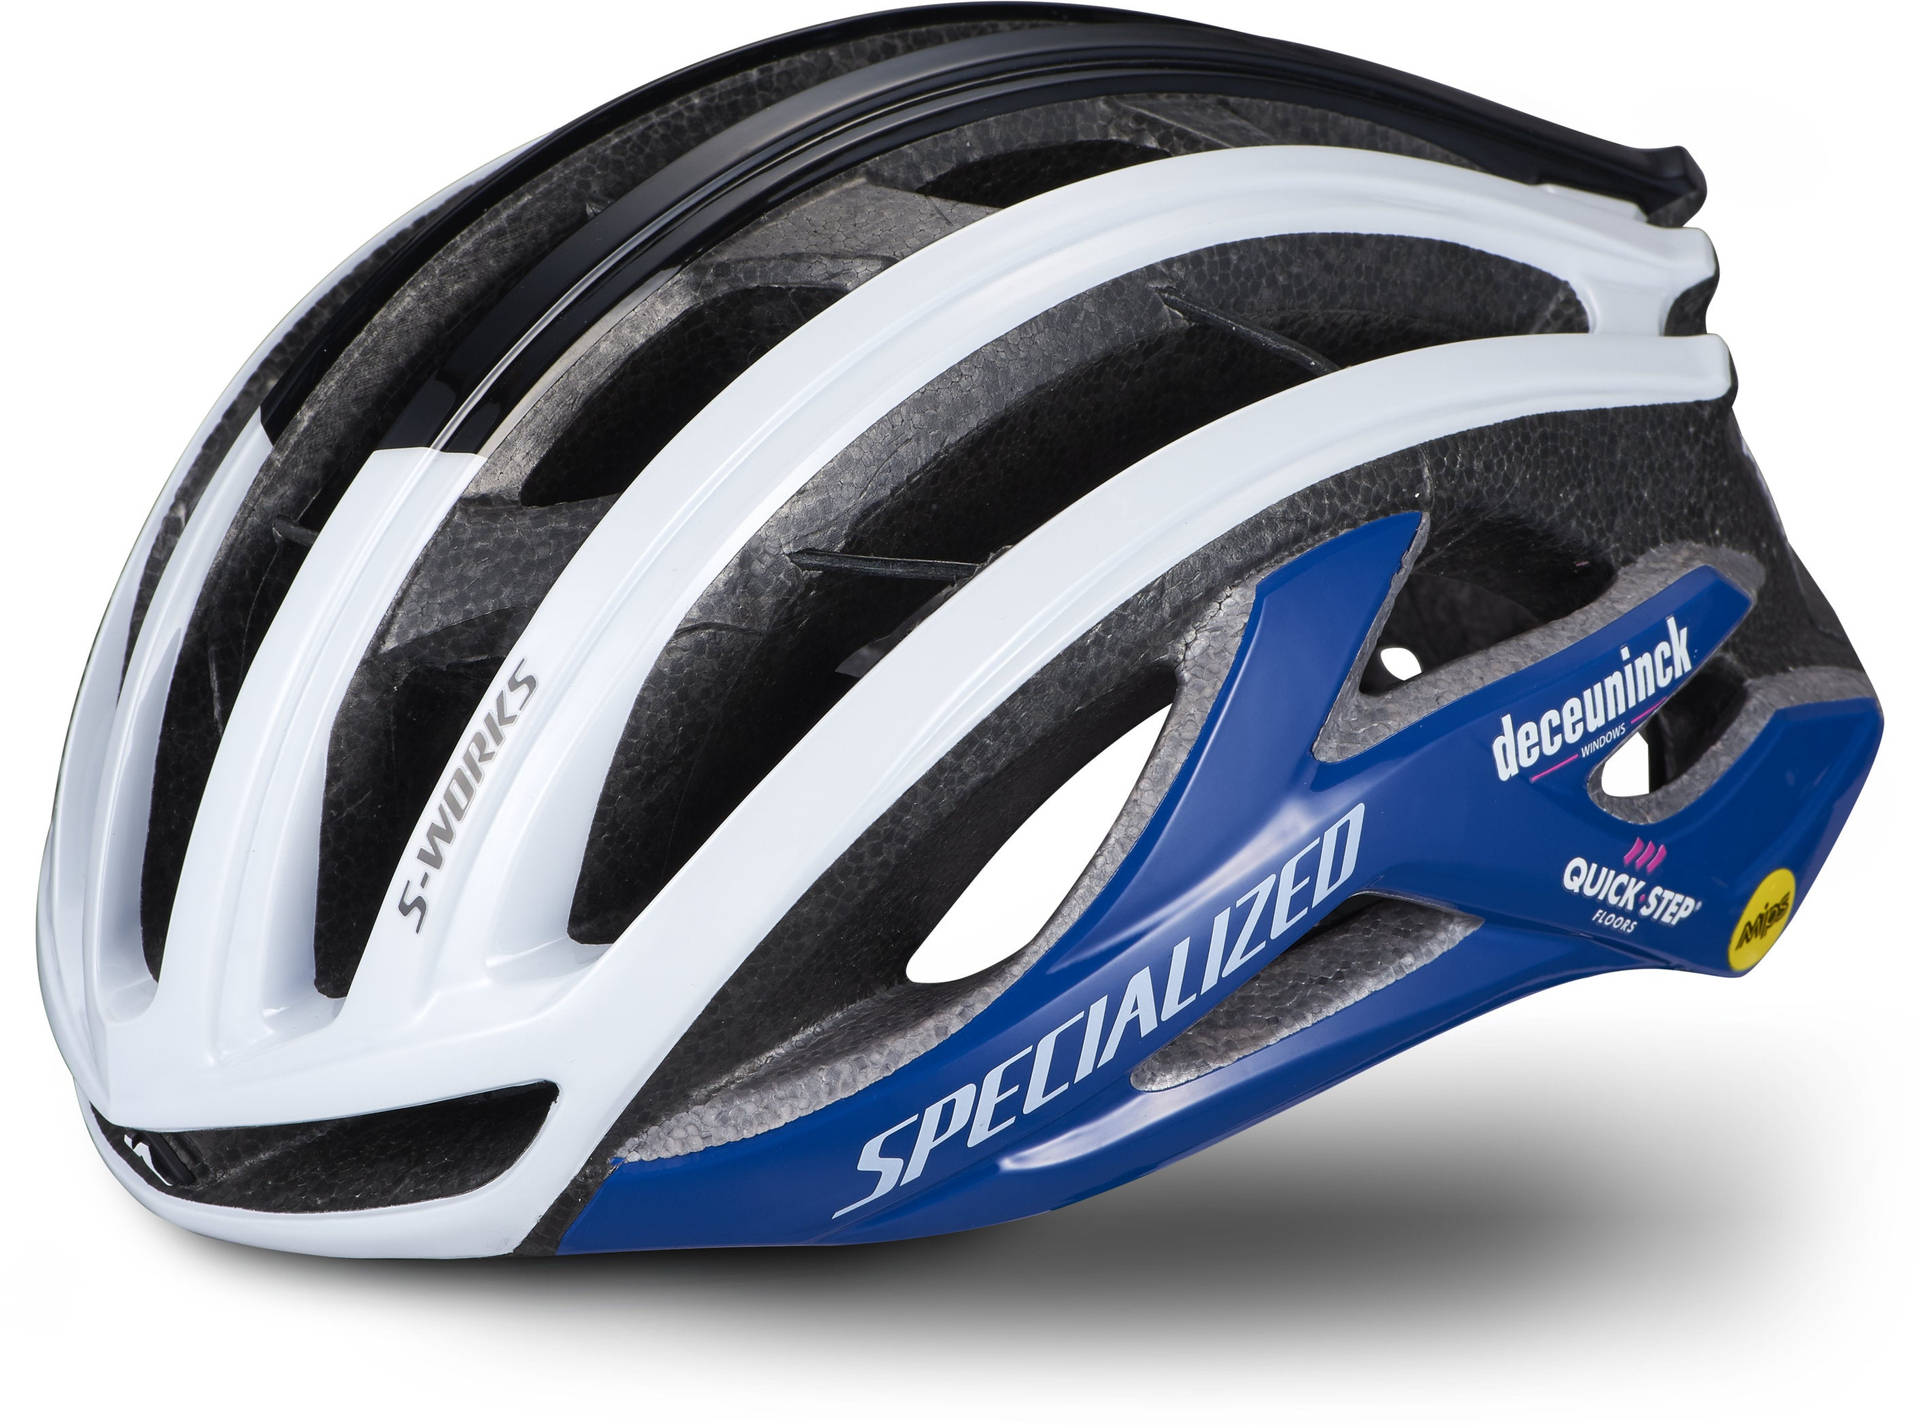 White And Blue Specialized Helmet Wallpaper